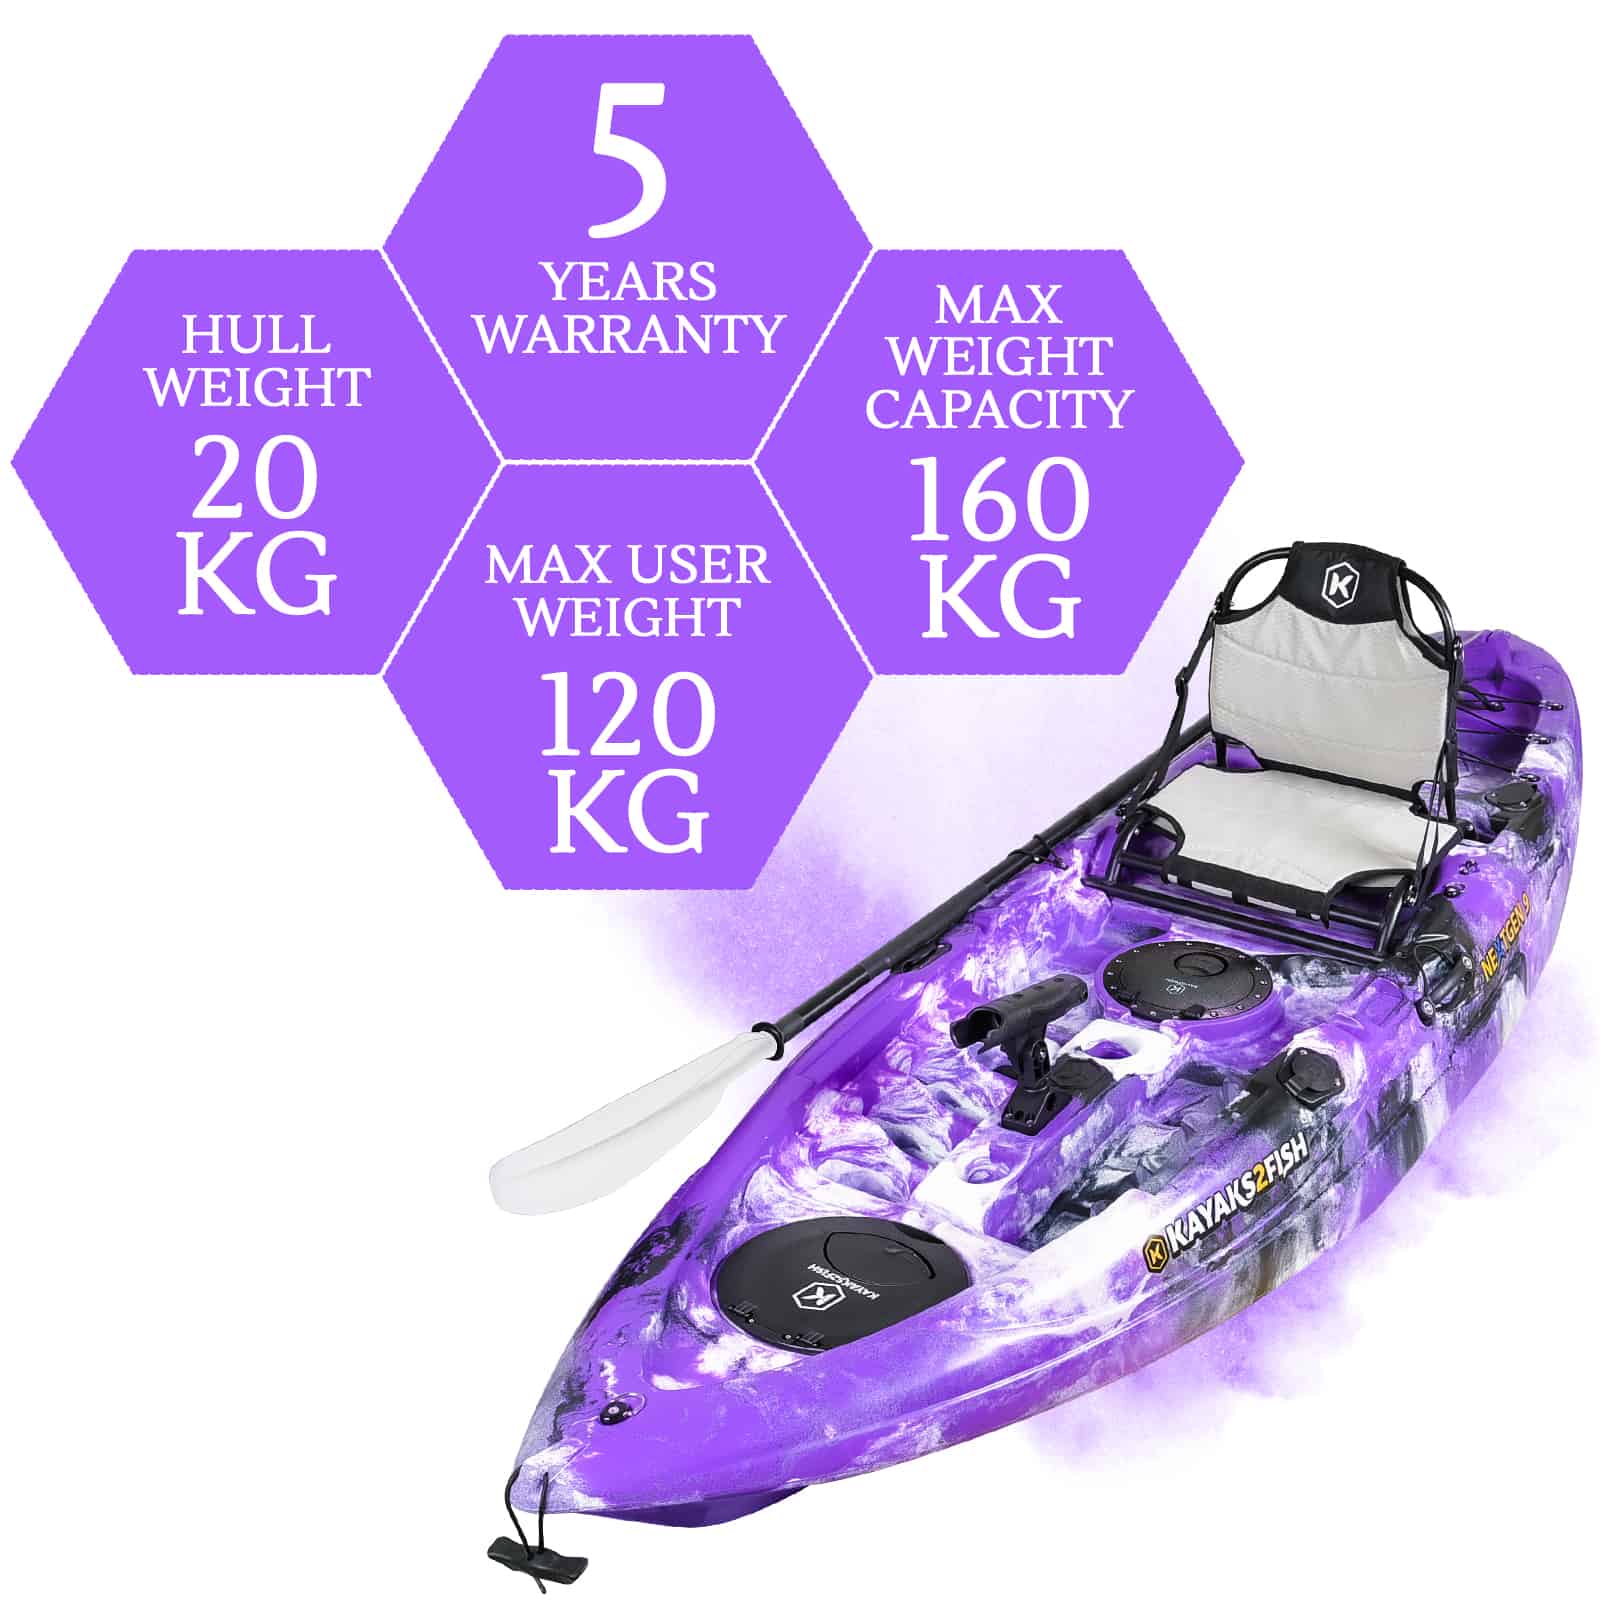 NG-09-PURPLECAMO specifications